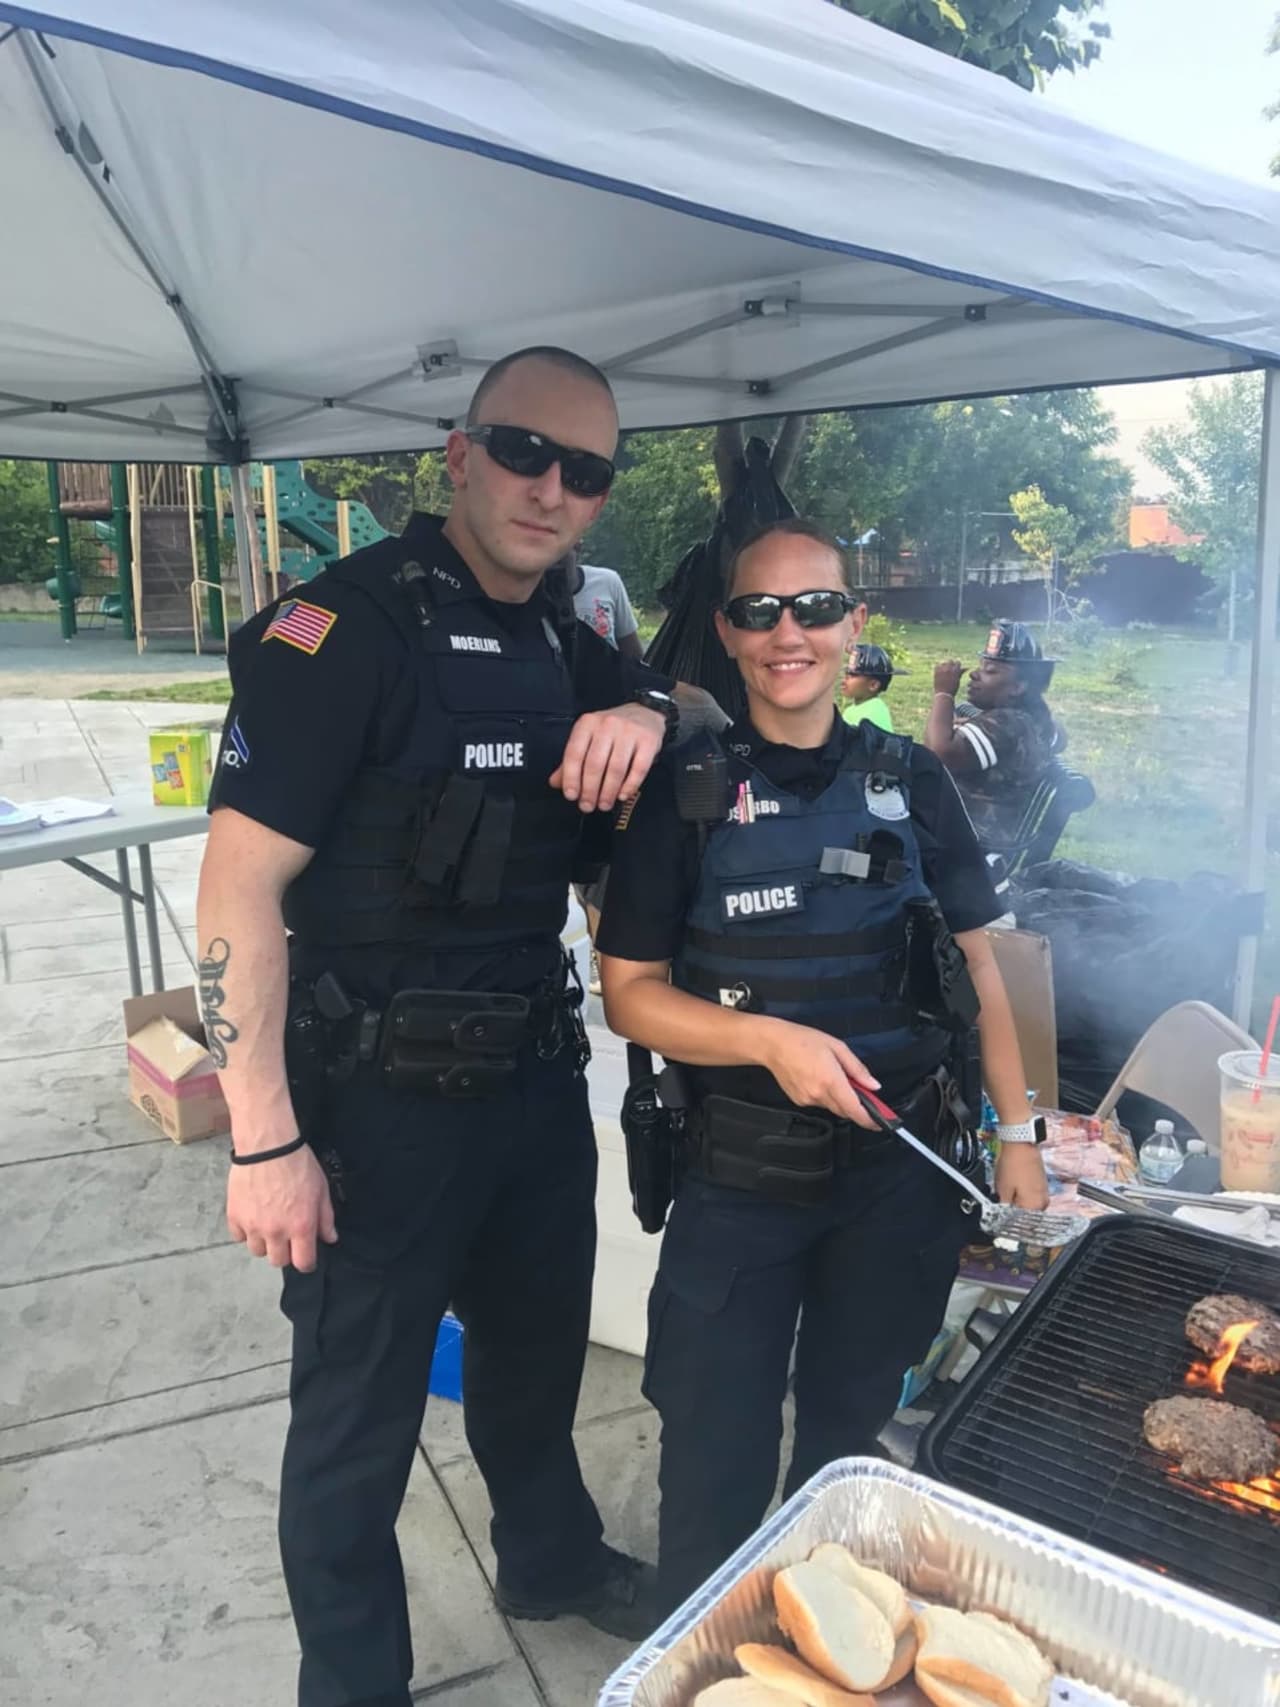 The City of Newburgh Police Department's barbecue has been canceled due to inclement weather.